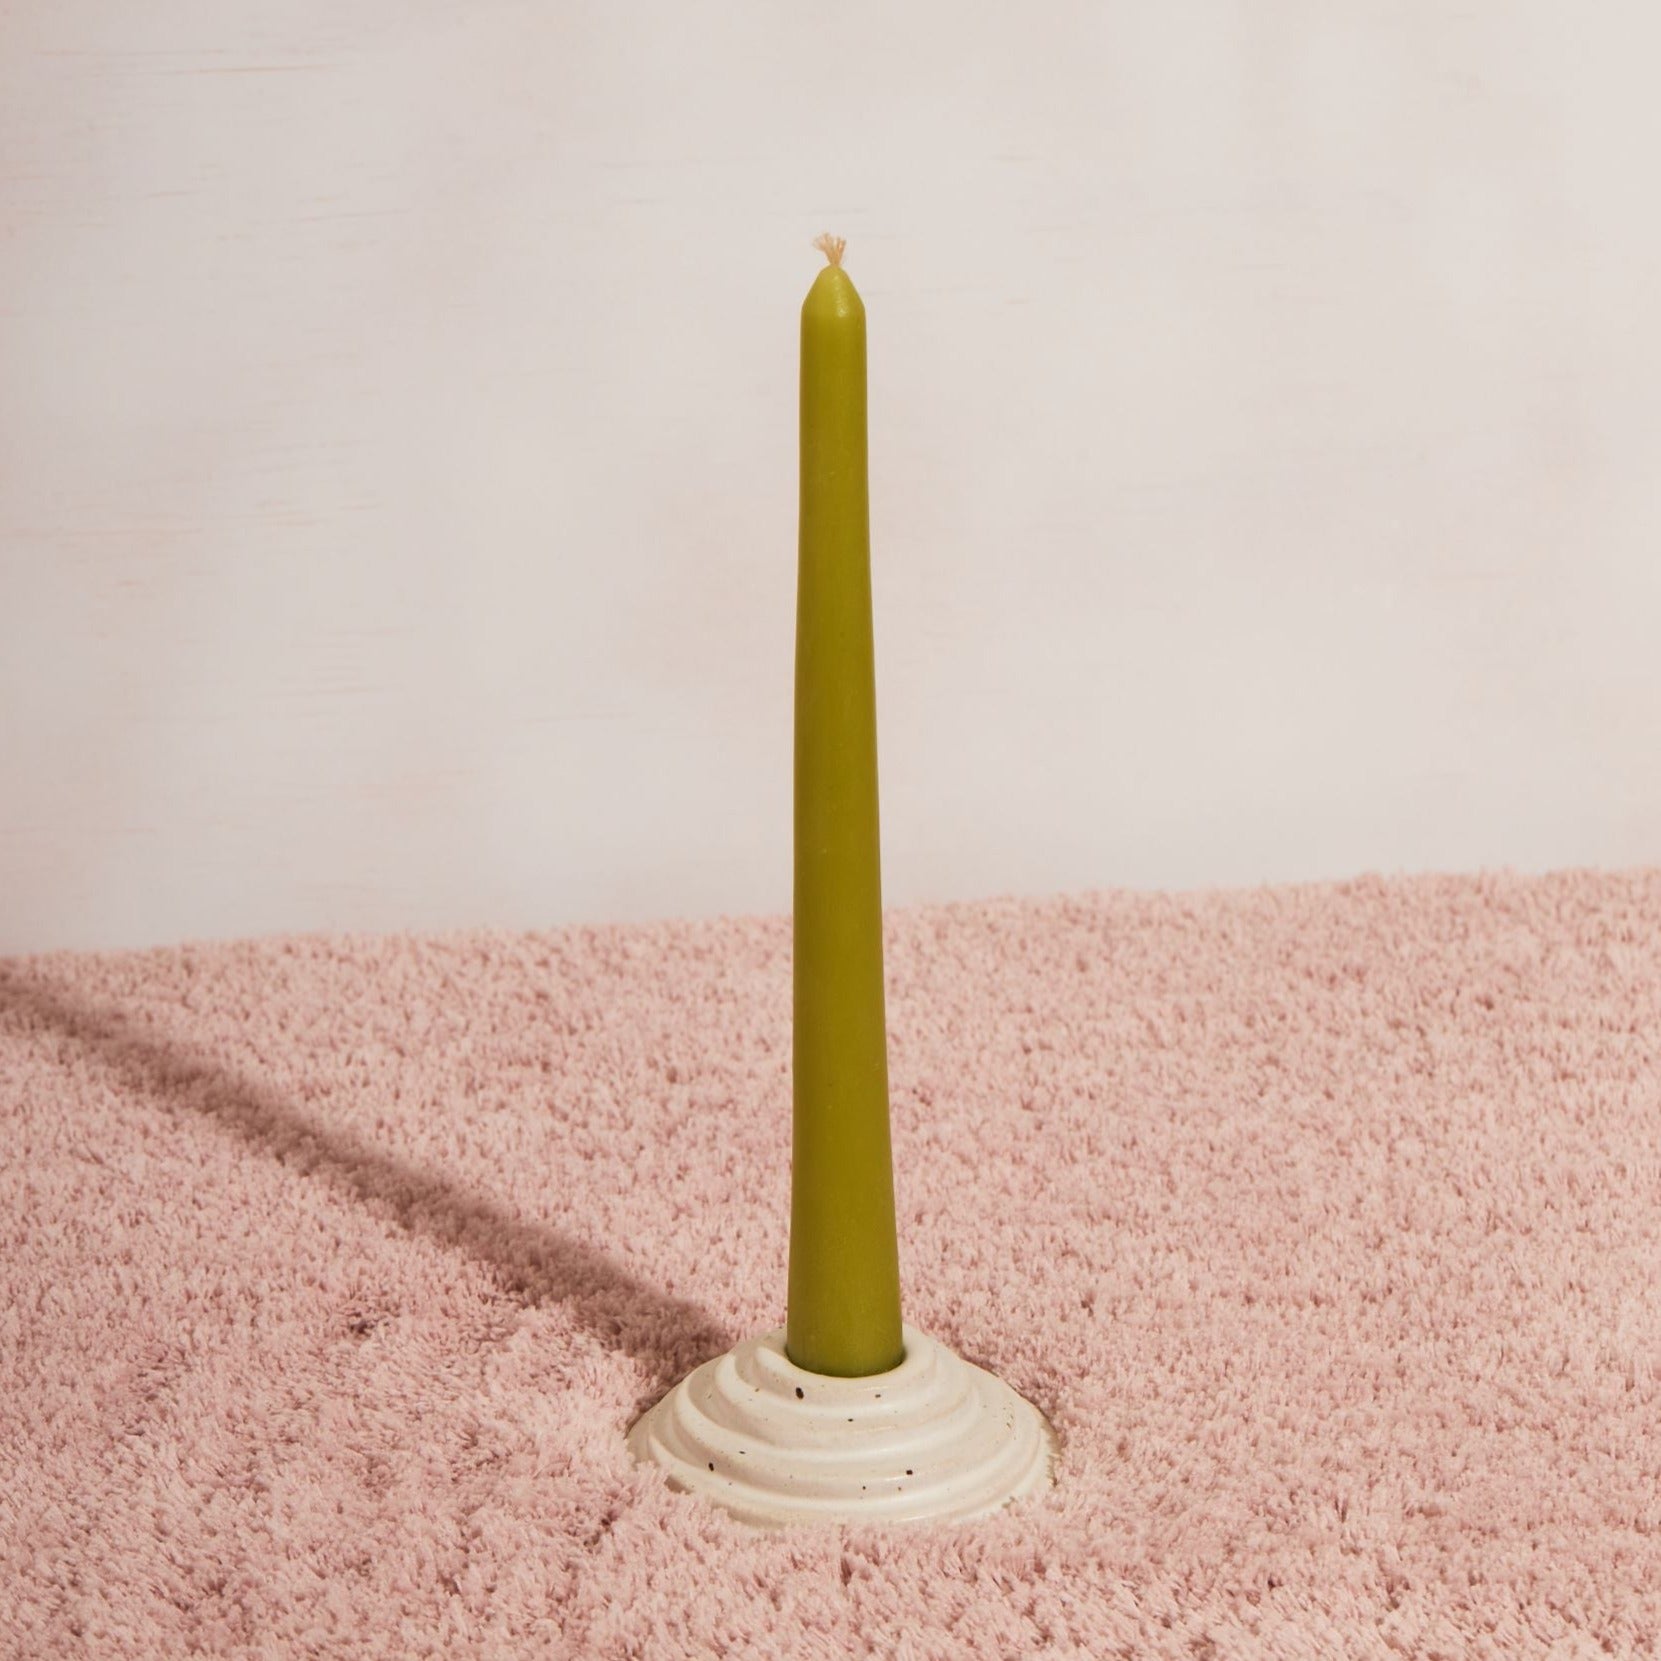 A circular ceramic candle holder featuring steps leading up to the candle. This candle holder has a green unlit candle and is sitting on a pink fluffy fabric with a white backdrop. 